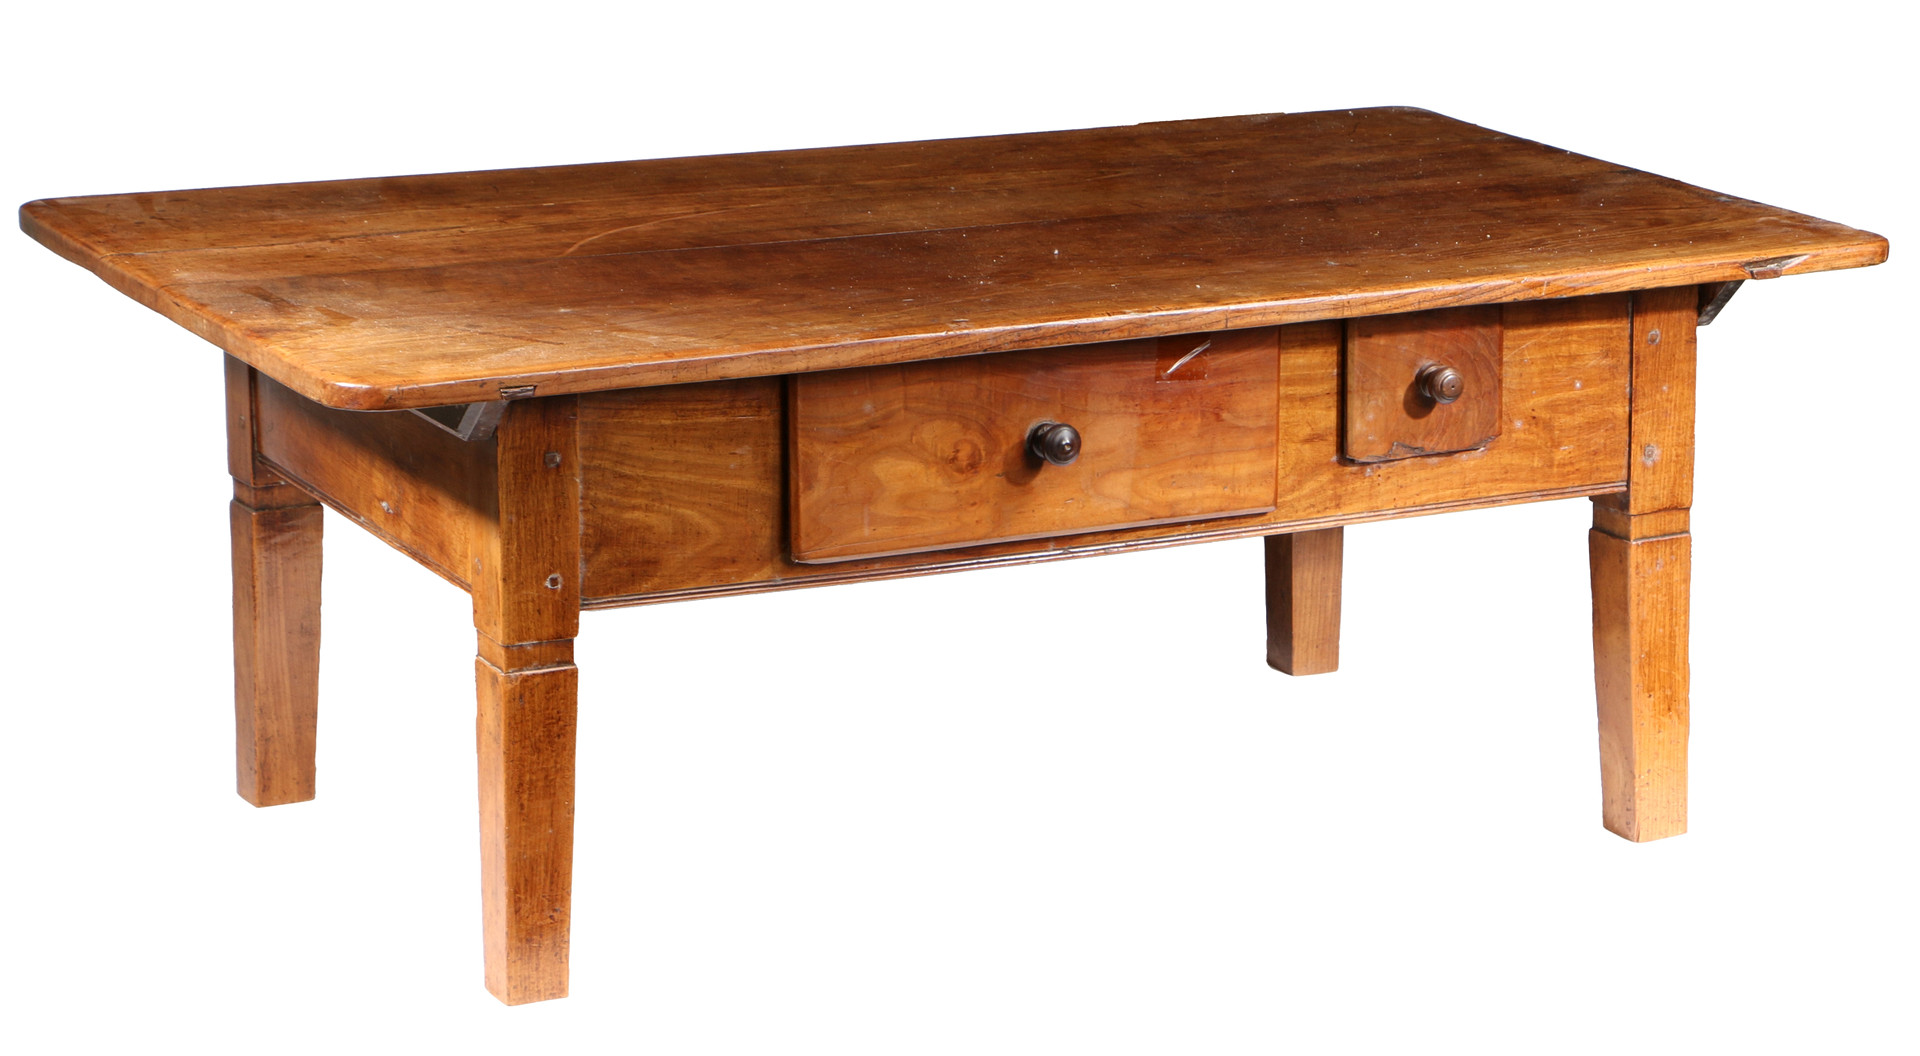 A FRUITWOOD FARMHOUSE TABLE, REDUCED IN HEIGHT TO FORM A COFFEE TABLE, CIRCA 1800. - Image 2 of 2